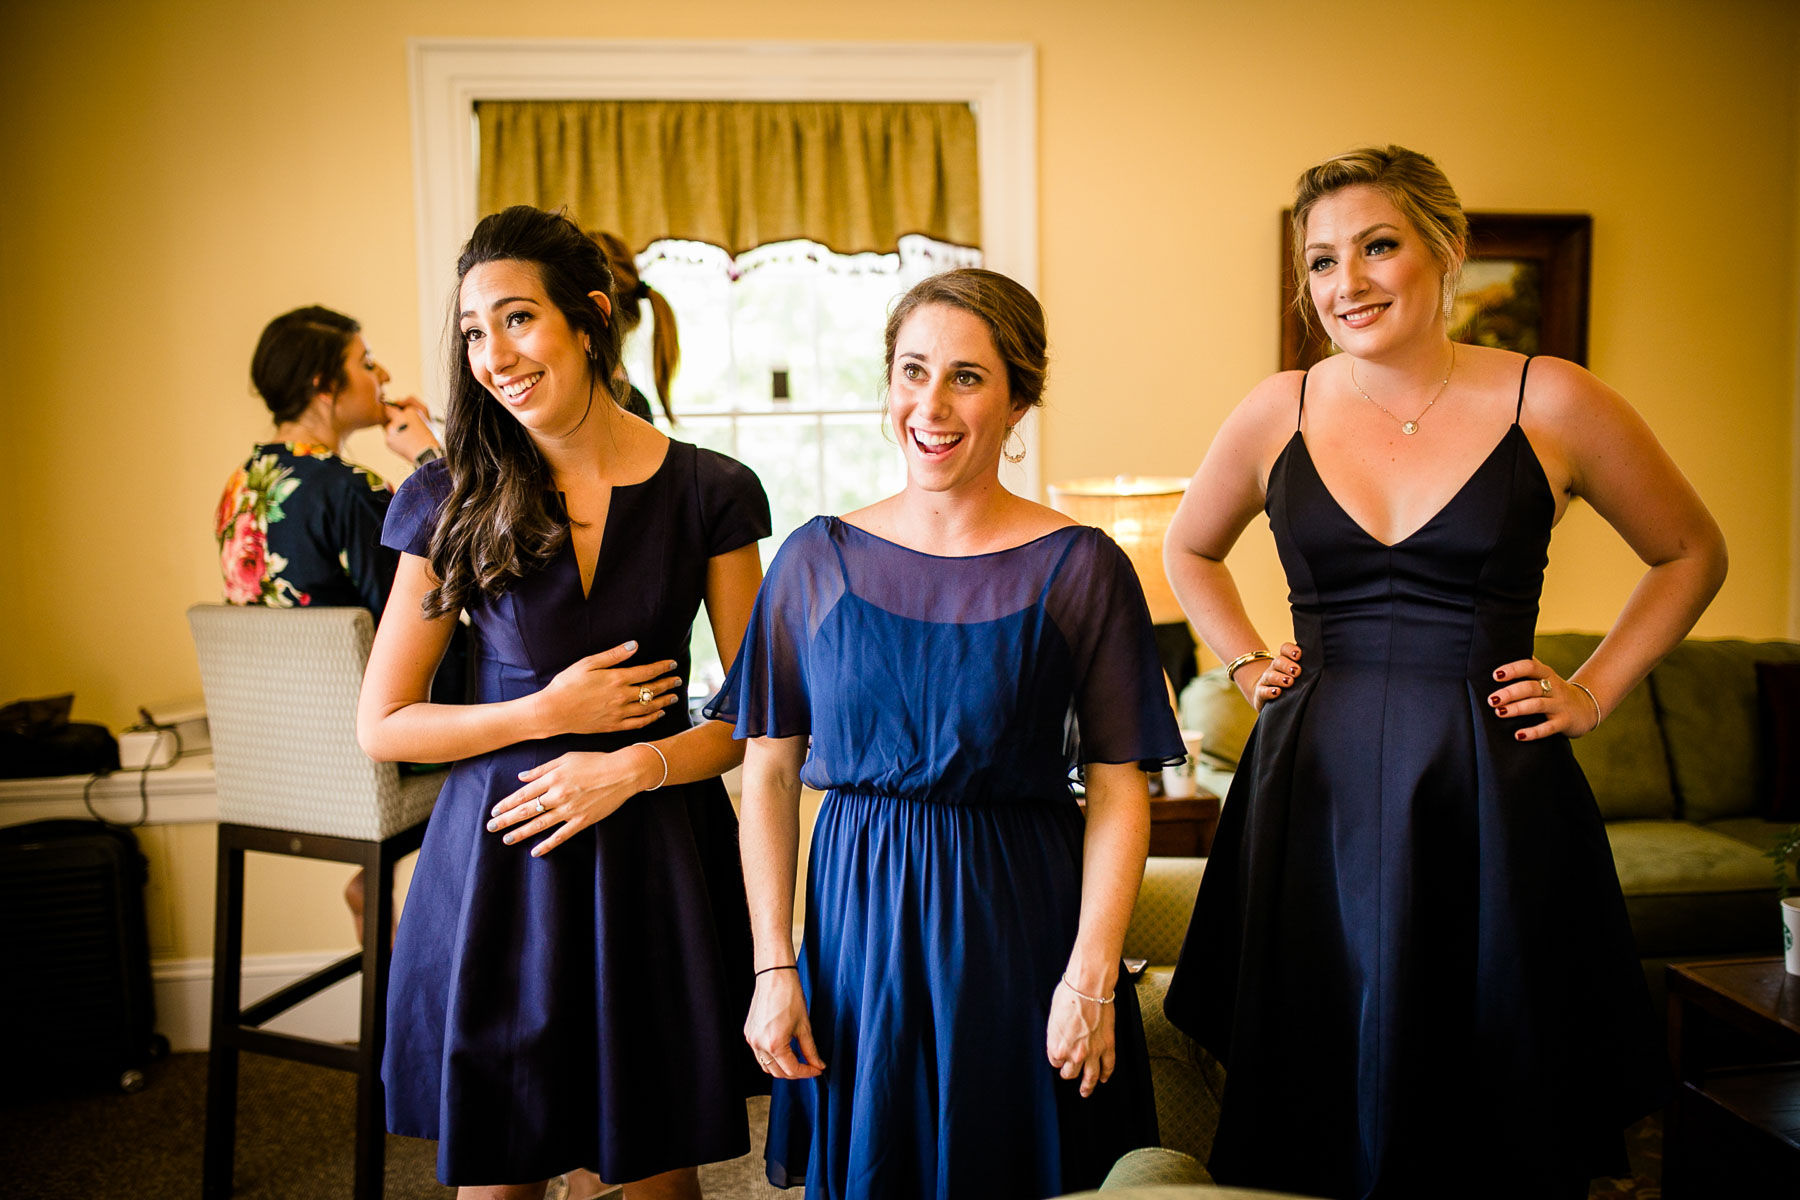 The_Connors_Center_Wedding_Dan_Aguirre_Photography_011